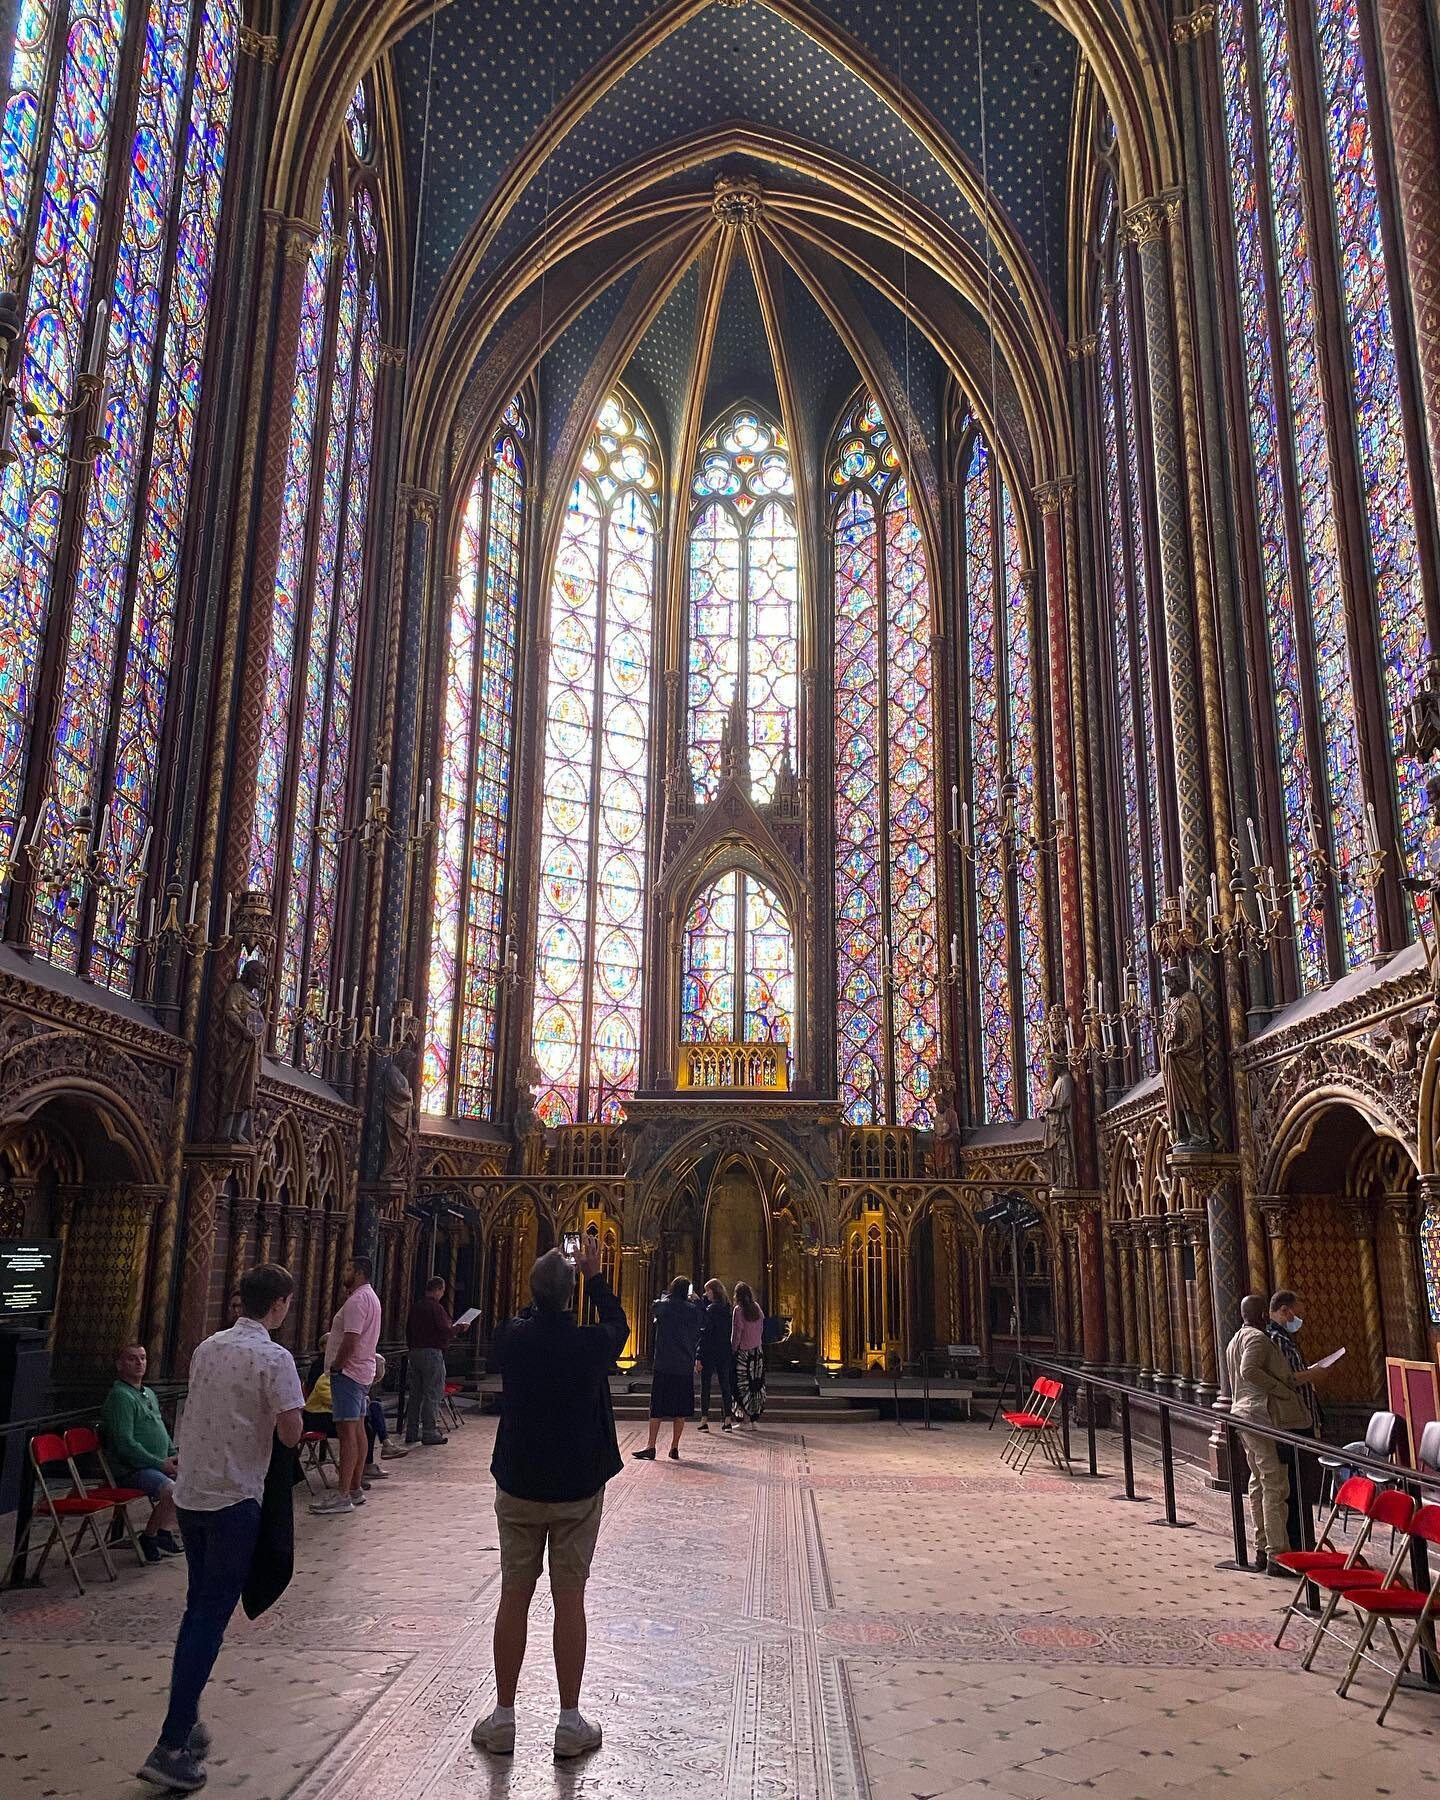 Paris &ldquo;Pretreat&rdquo;: We saw incredible 13th century stain glass, ogled Kusumoto's home: Notre Dame, perused through pages at the world's greatest local book store, ate out-of-this-world pastries, saw Victor Hugo's house, sampled the best fal